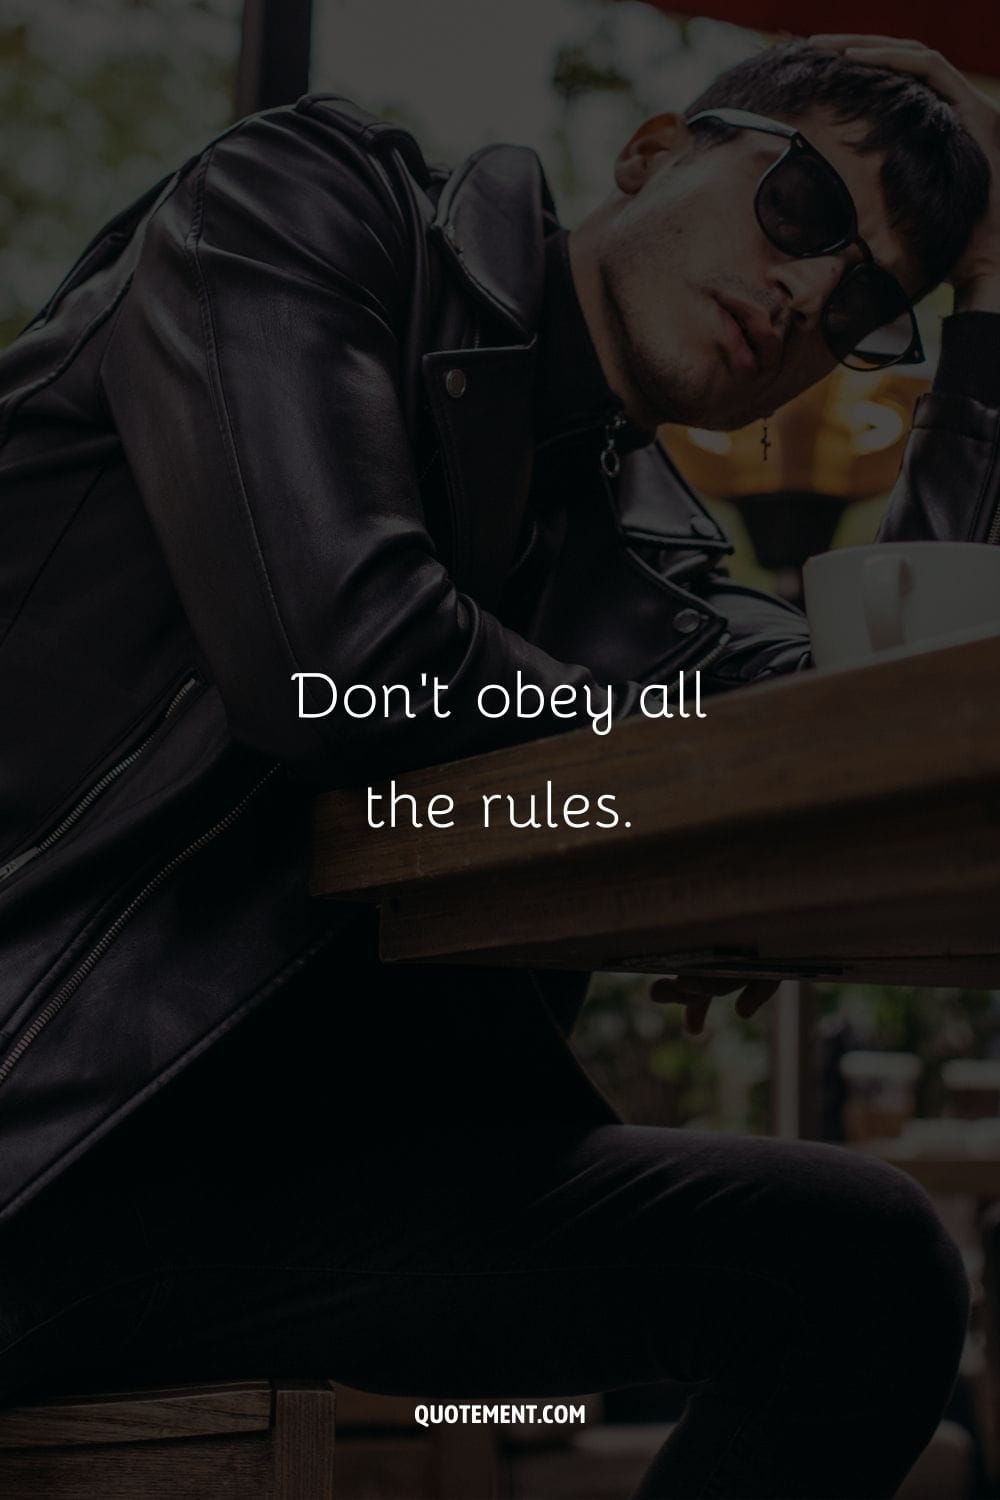 Don’t obey all the rules.